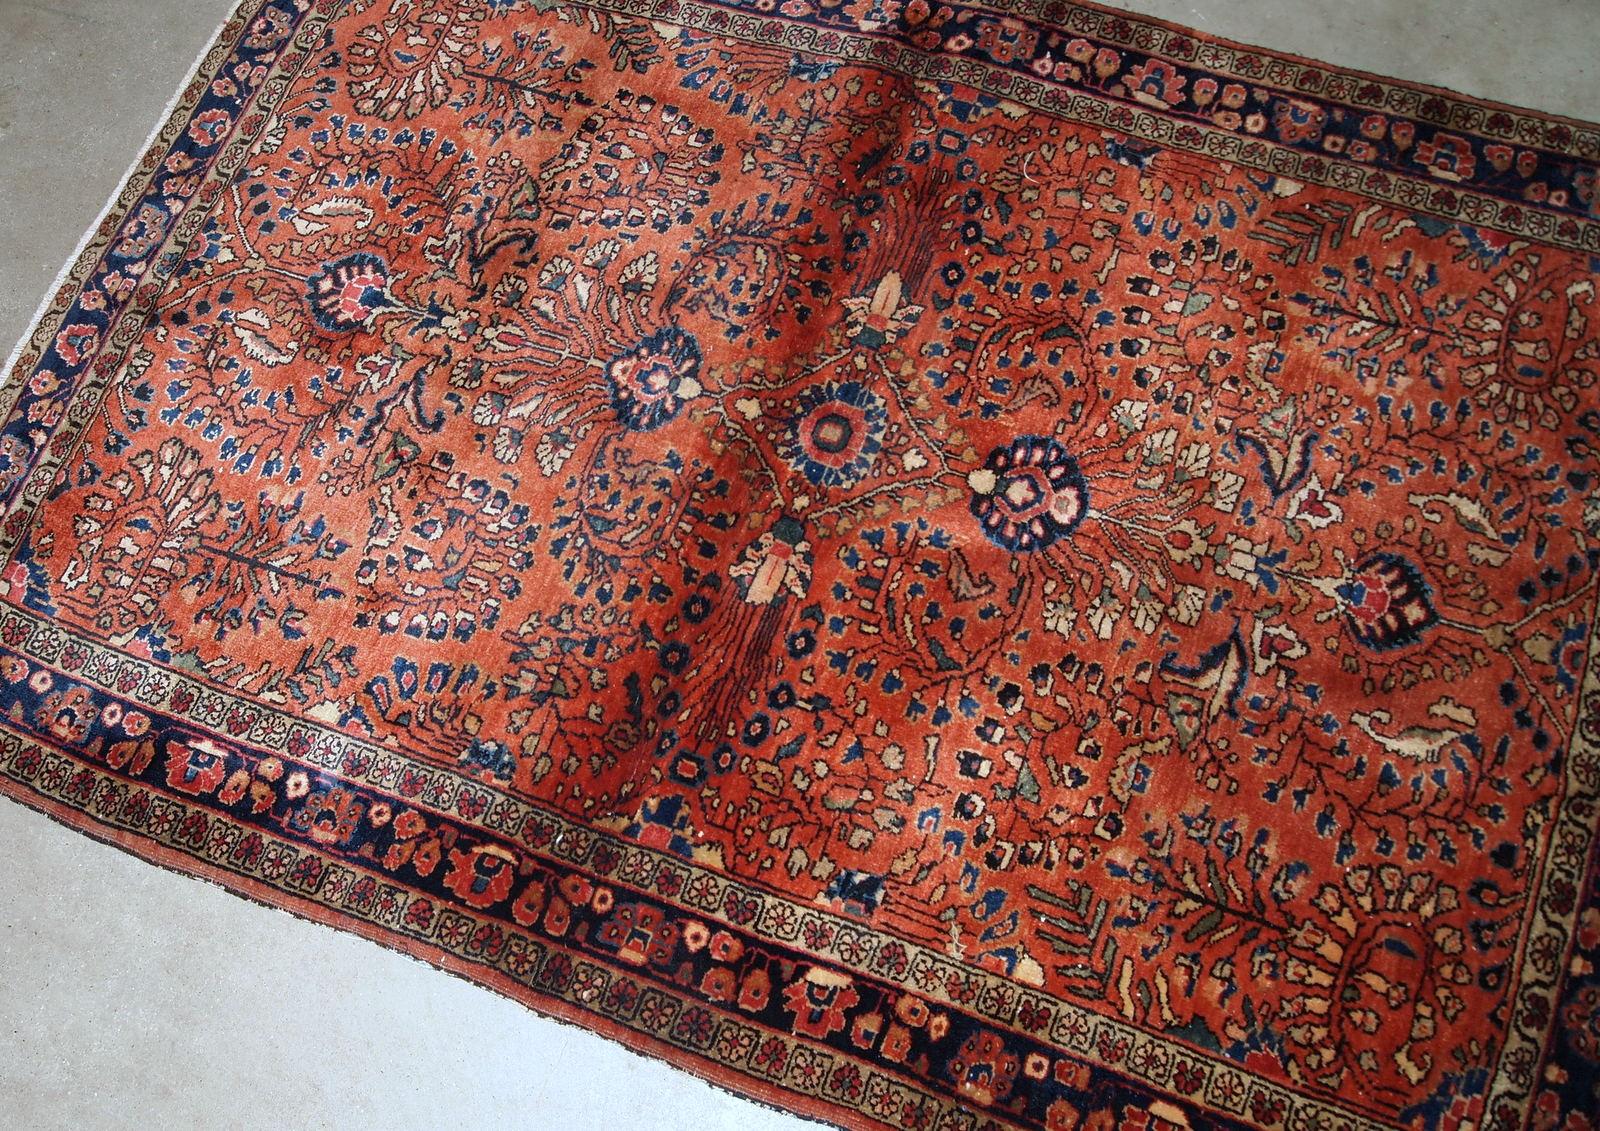 Handmade antique Sarouk style rug in original good condition. The rug is from the beginning of 20th century made in bright red wool. 

?-condition: original good,

-circa: 1920s,

-size: 3.5' x 5.5' (106cm x 167cm),

-material: